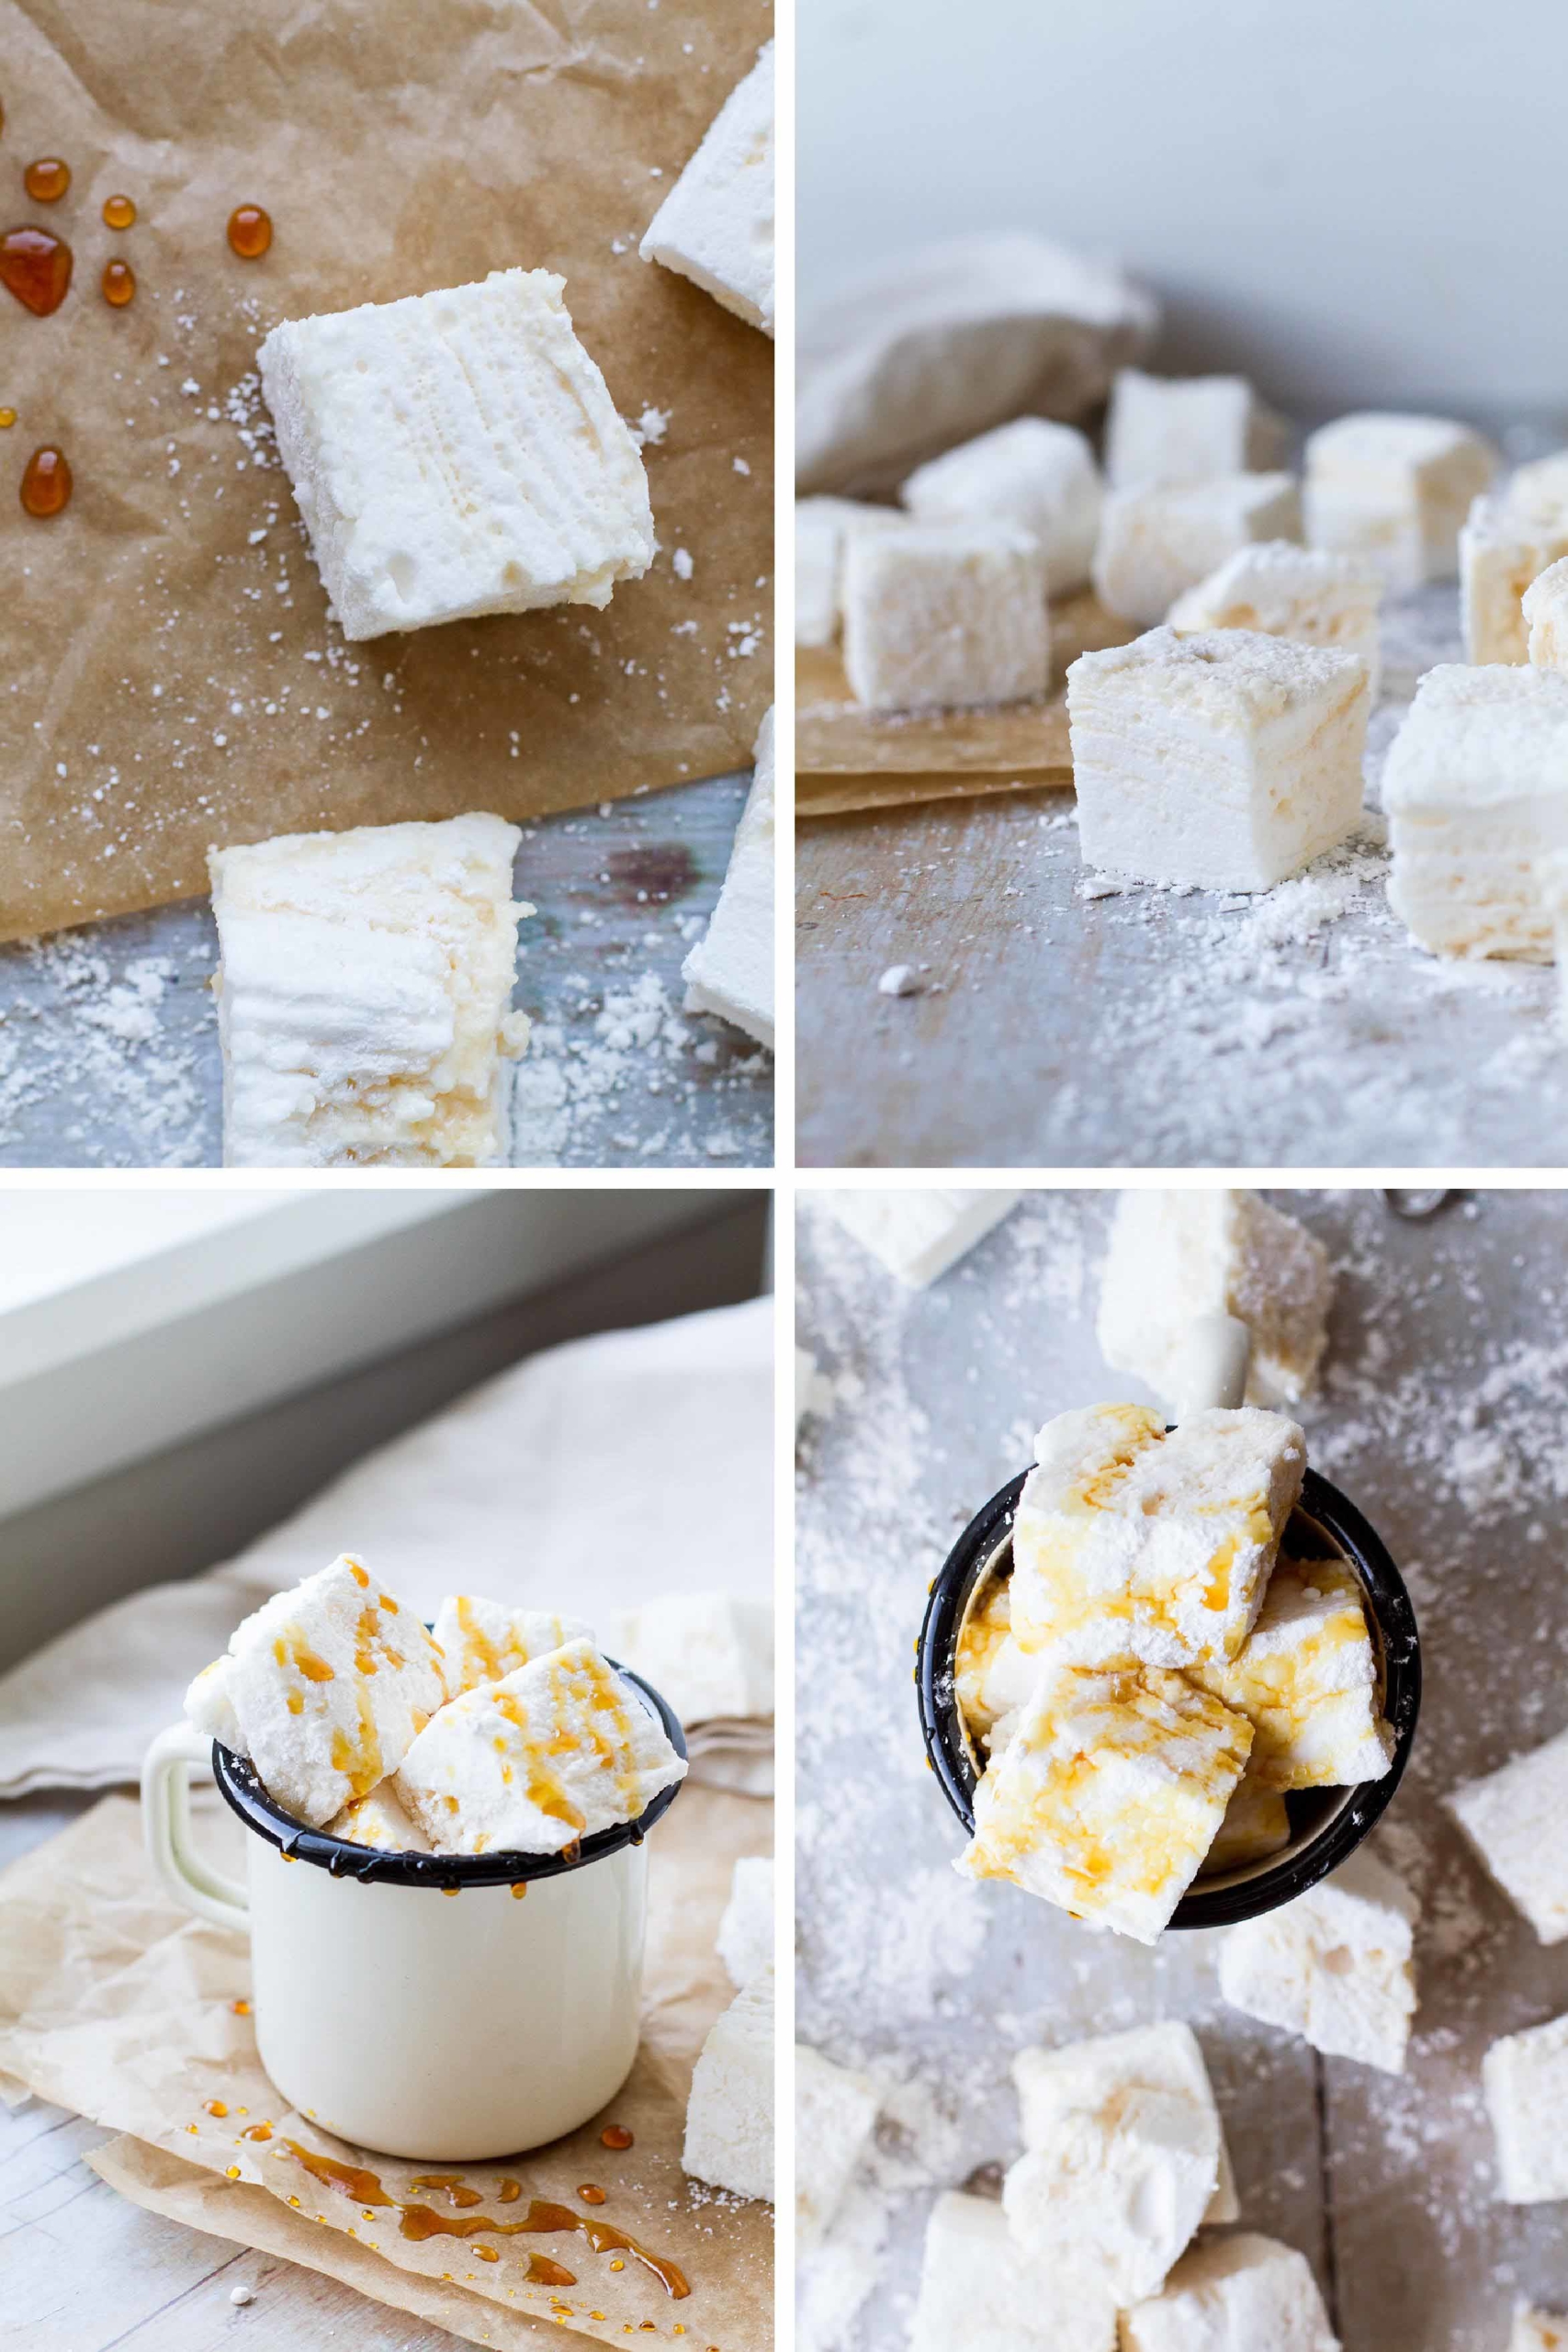 Four images on how the marshmallows with mixed salted caramel sauce looks.